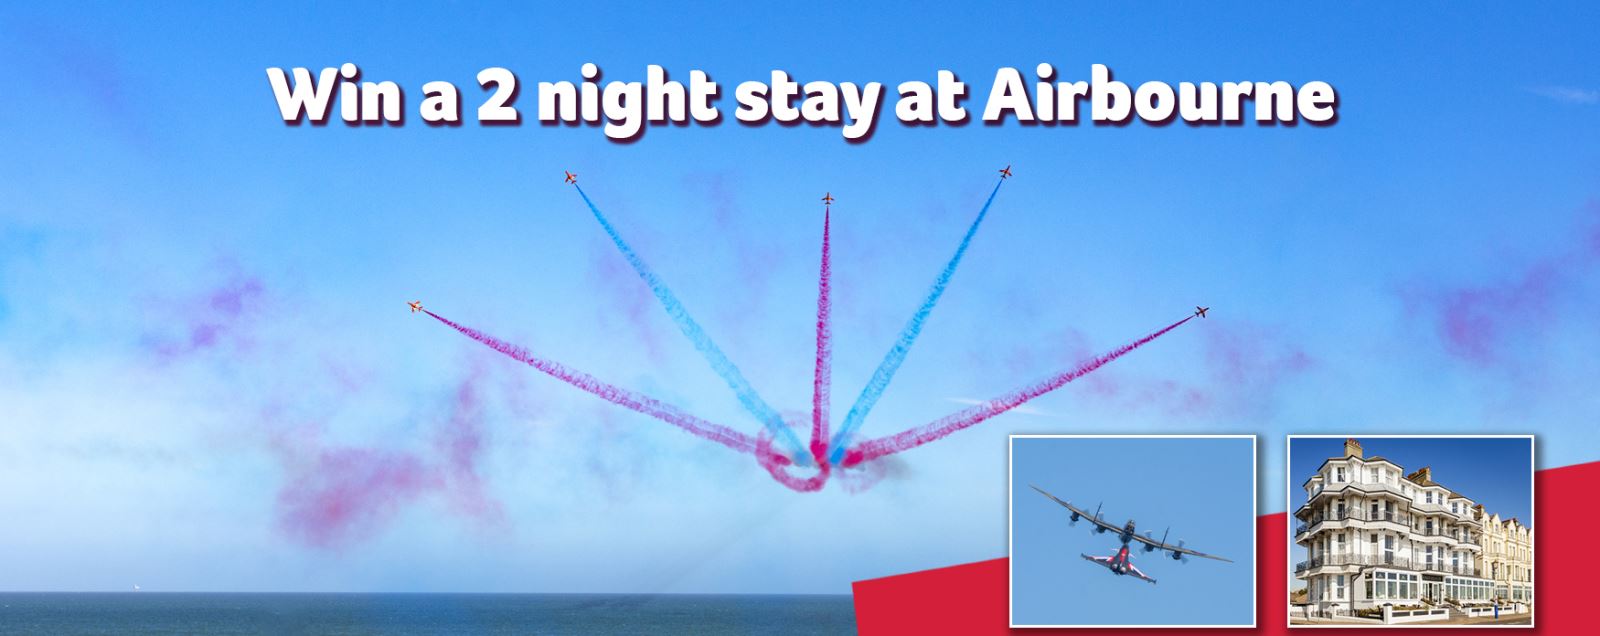 Win a stay at Airbourne